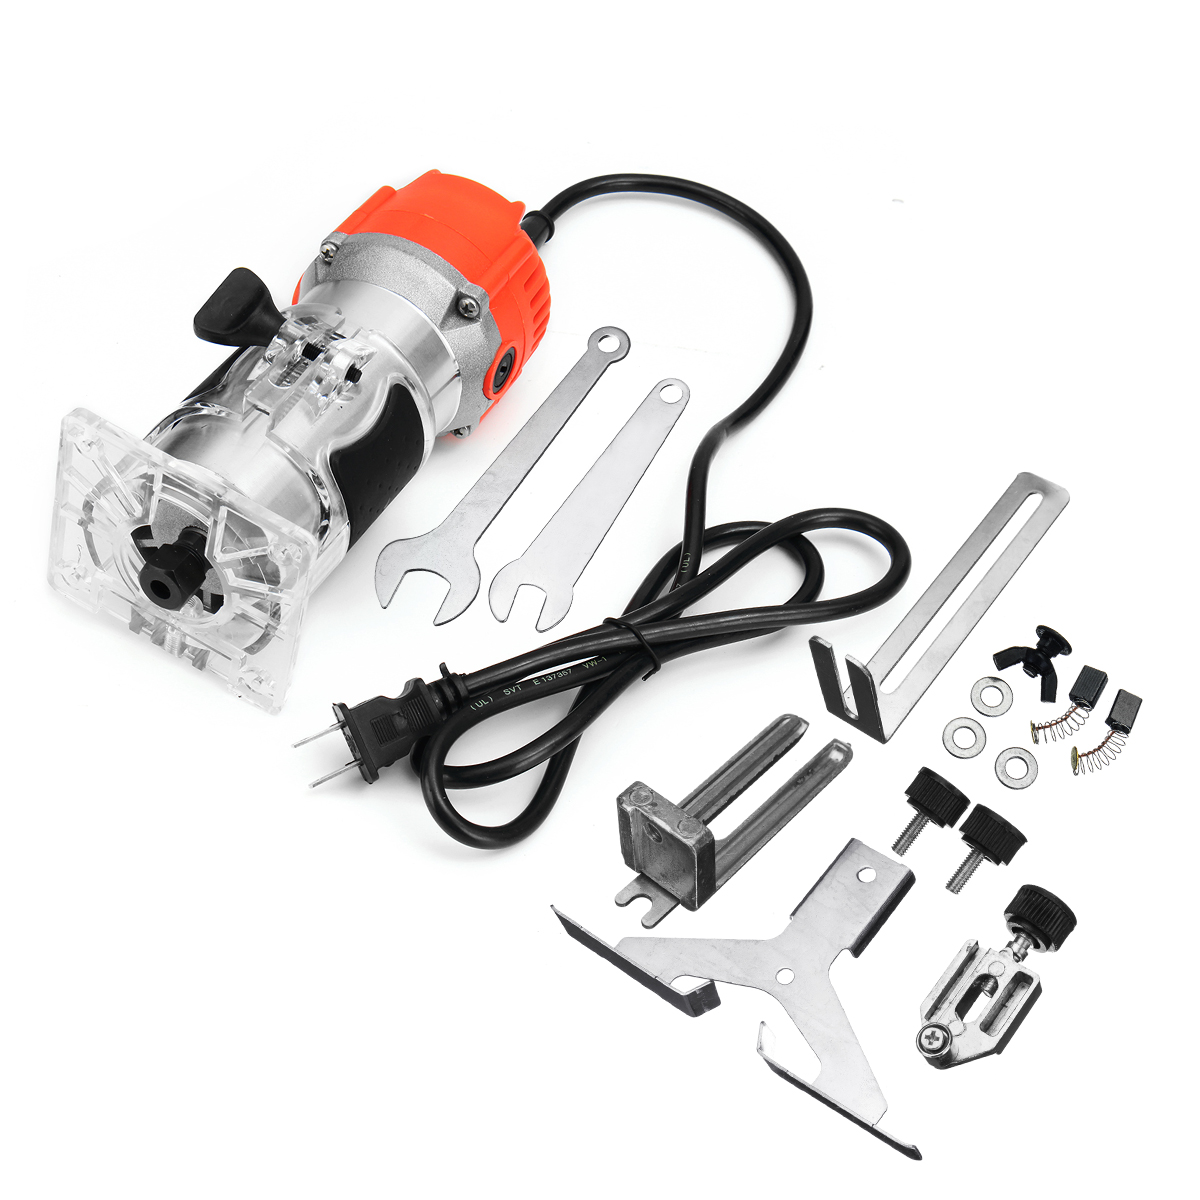 110V220V-680W-Trim-Router-Edge-Woodworking-Wood-Clean-Cuts-Power-Tool-Set-33000RPM-with-Box-1245528-3